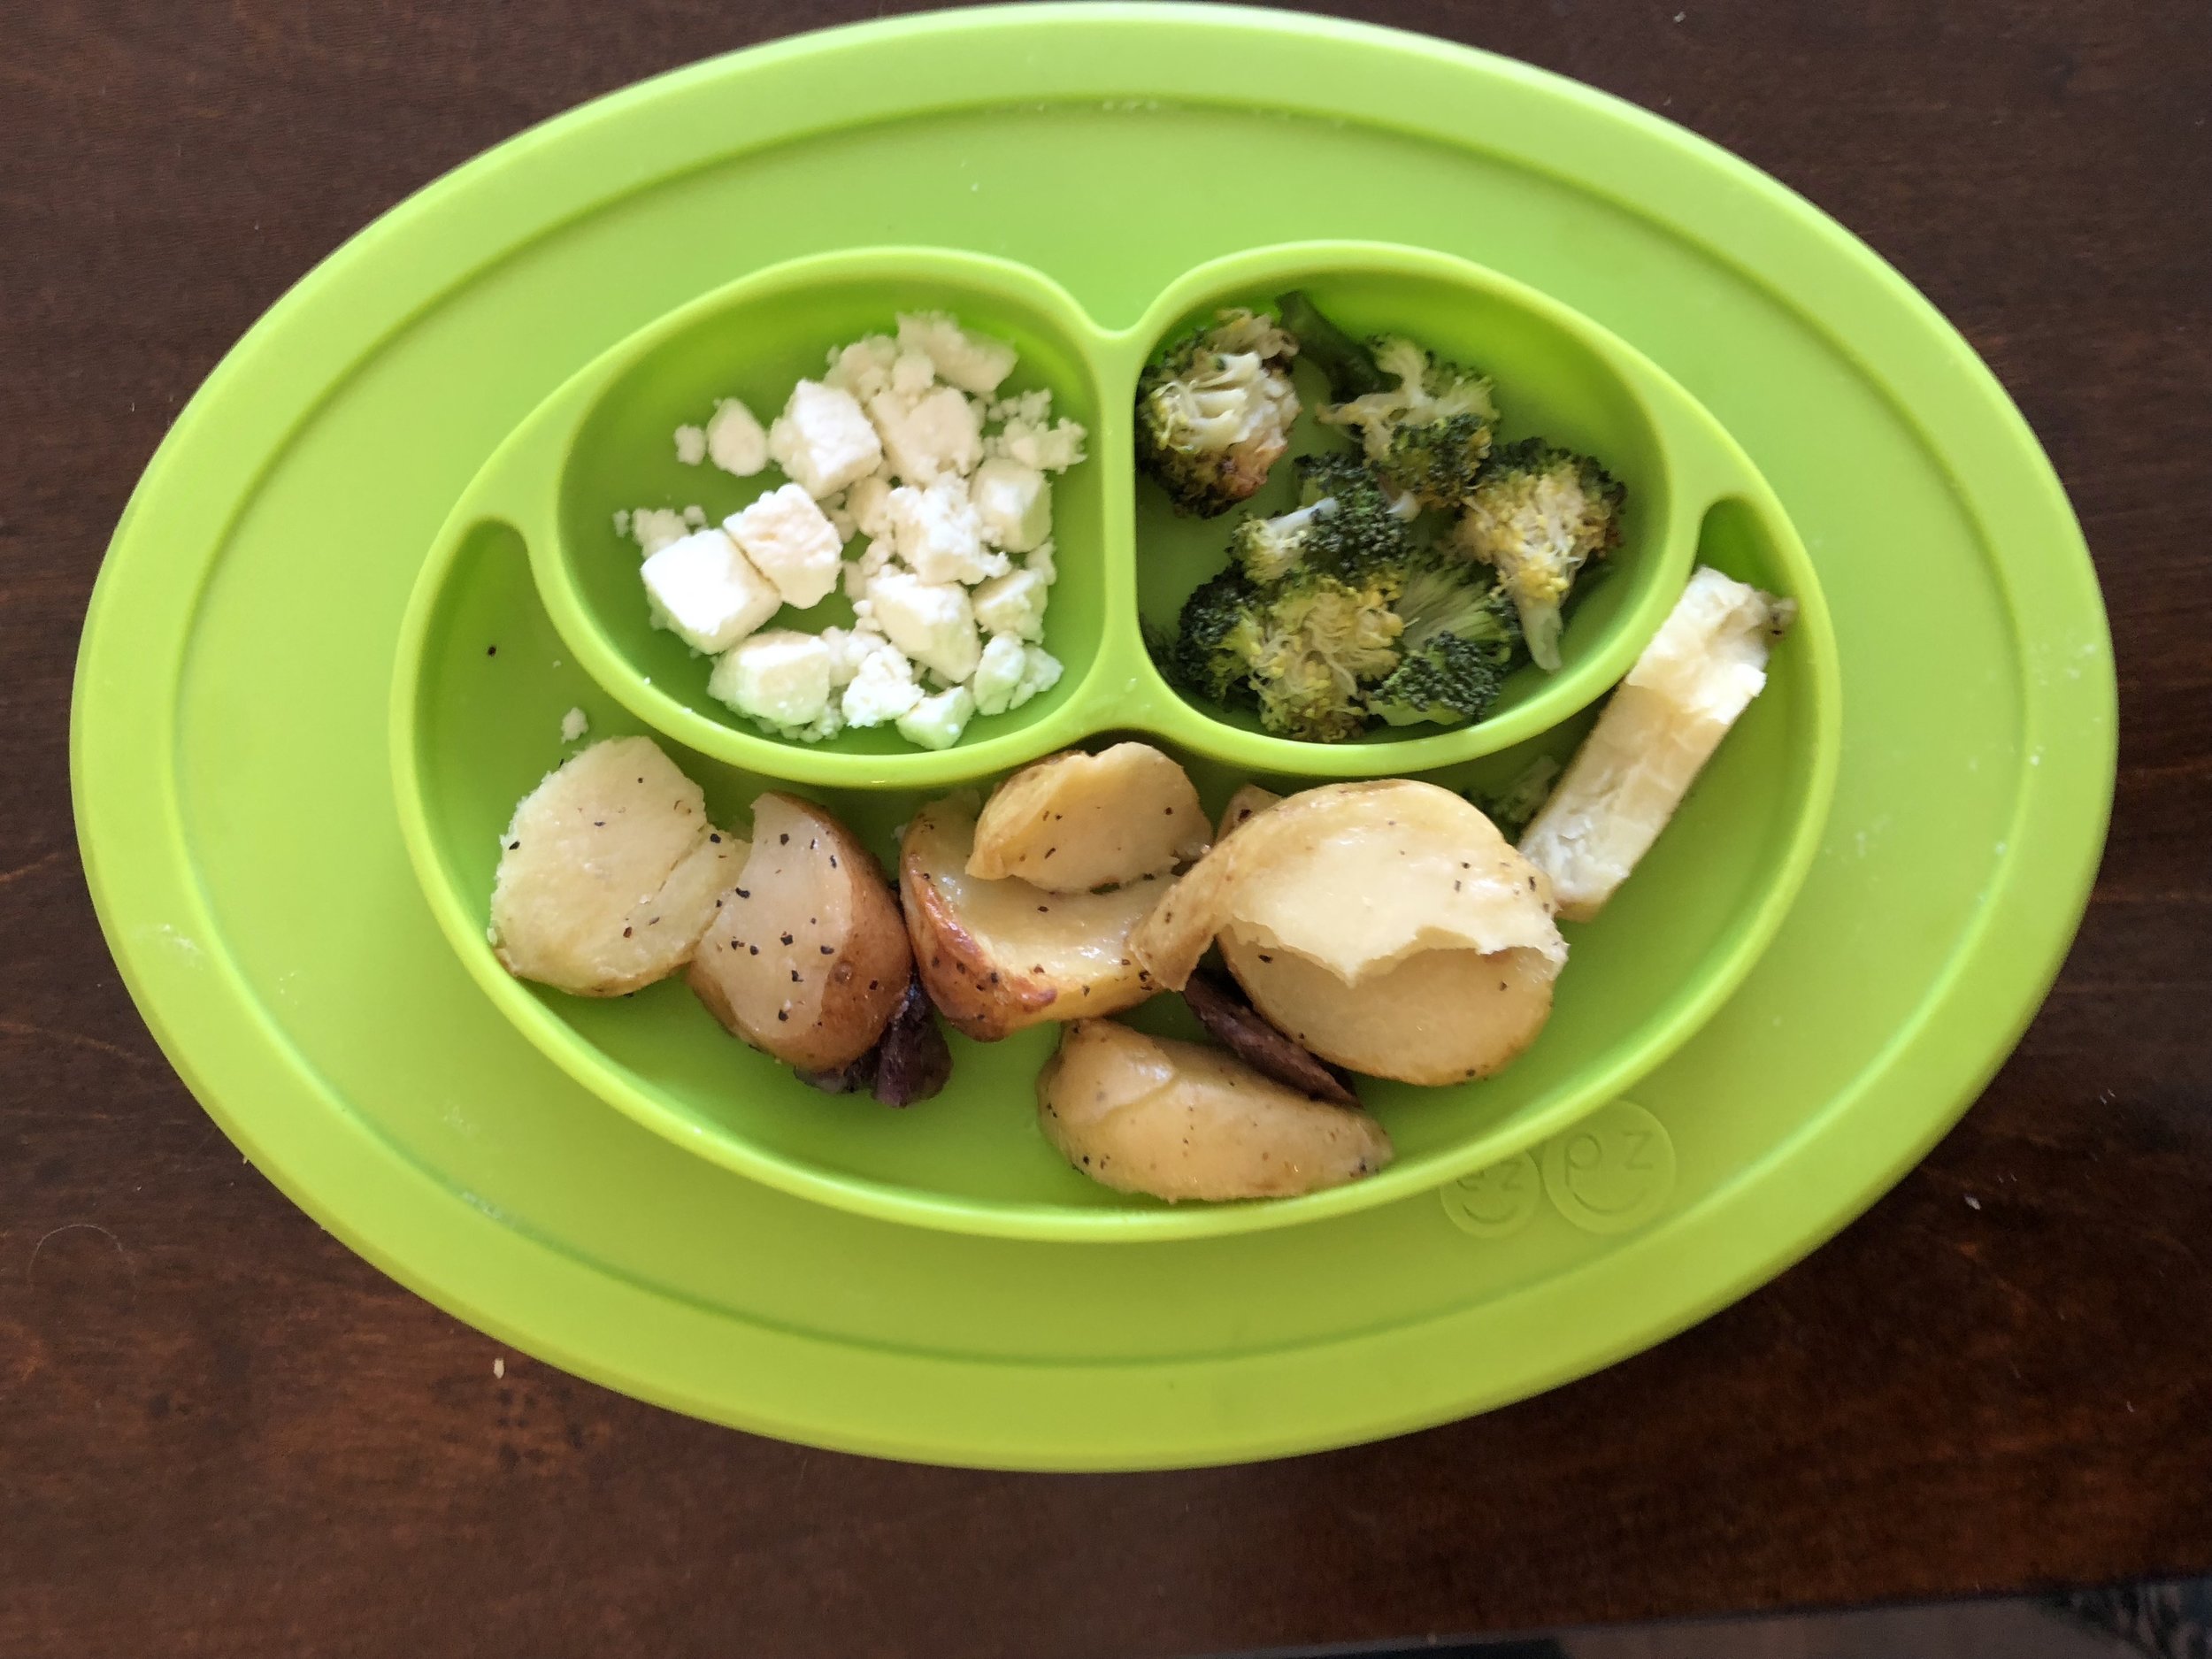 brussel sprouts and broccoli, feta cheese and potatoes